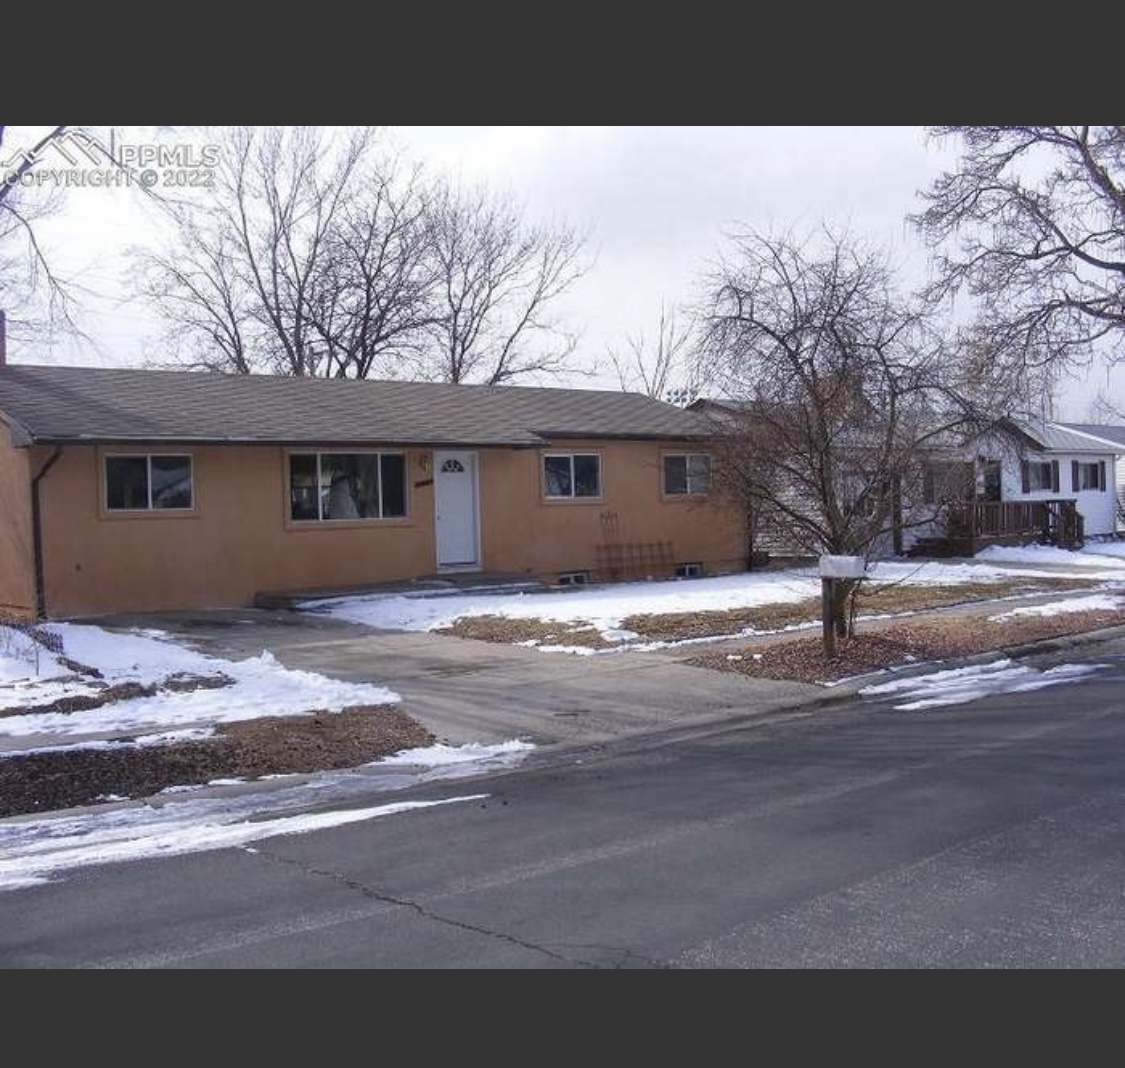 Photo: Colorado Springs House for Rent - $1262.00 / month; 3 Bd & 2 Ba